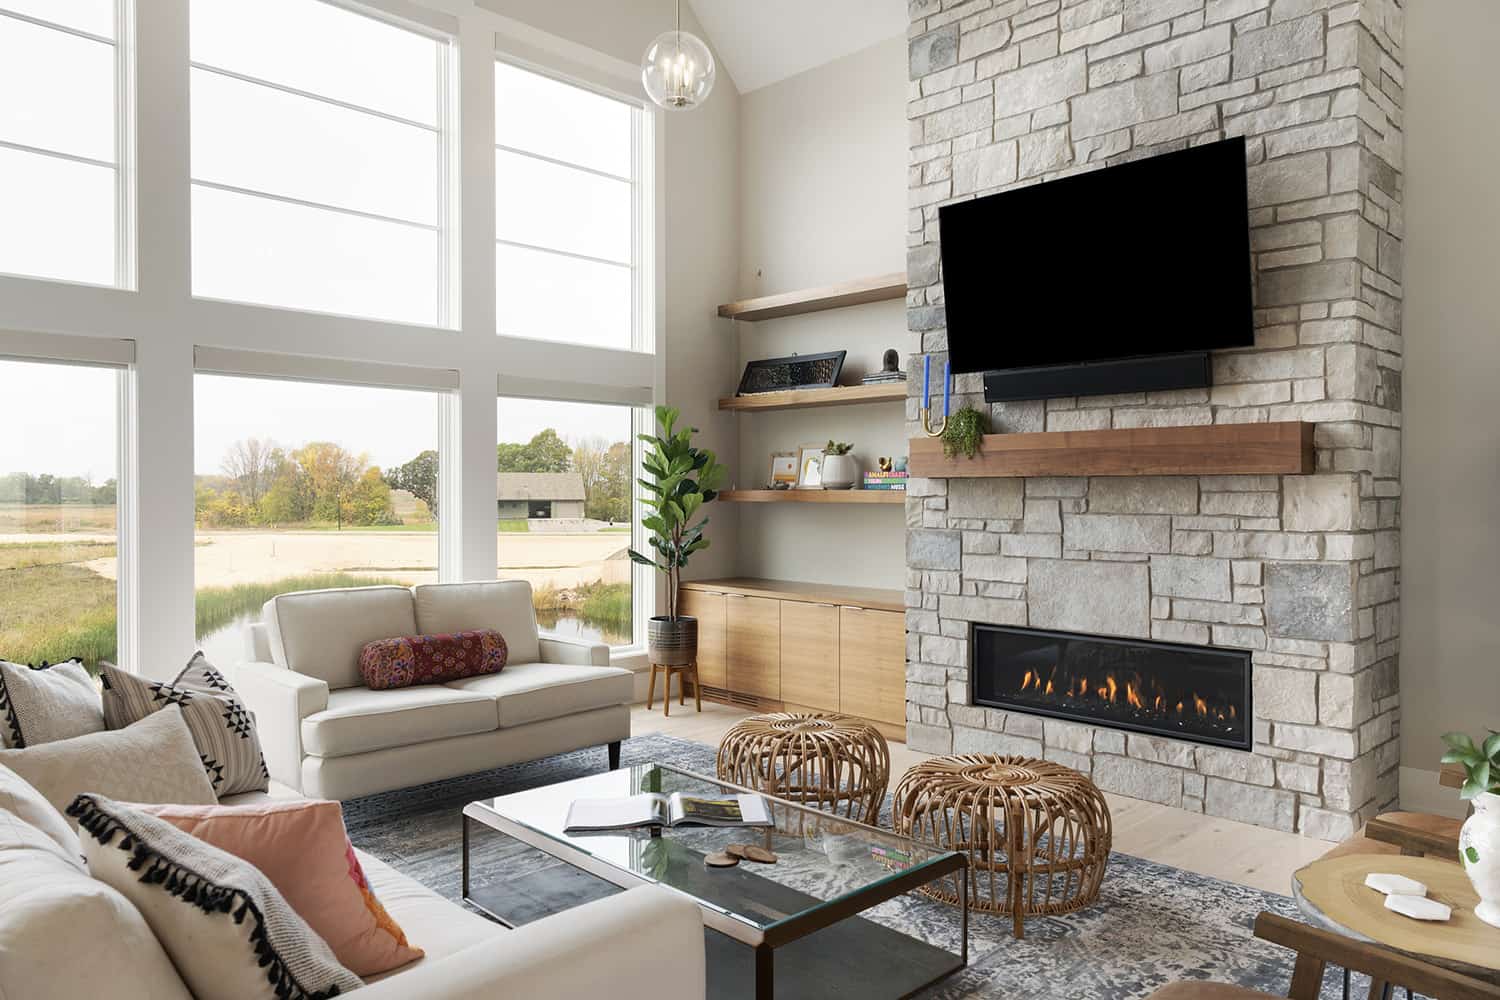  prairie-transitional-style-living-room